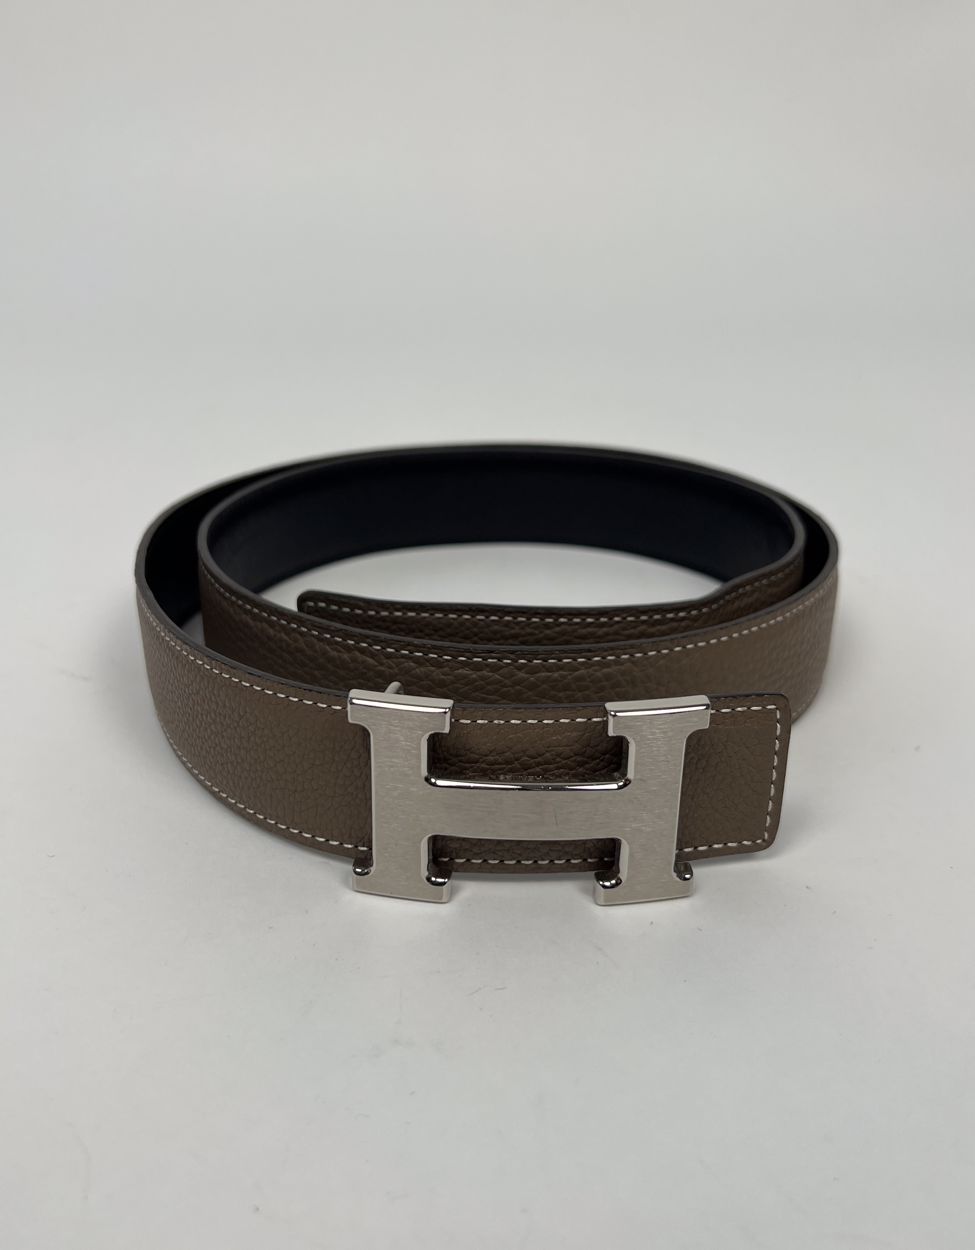 Hermes belt with silver buckle size 95 + box 